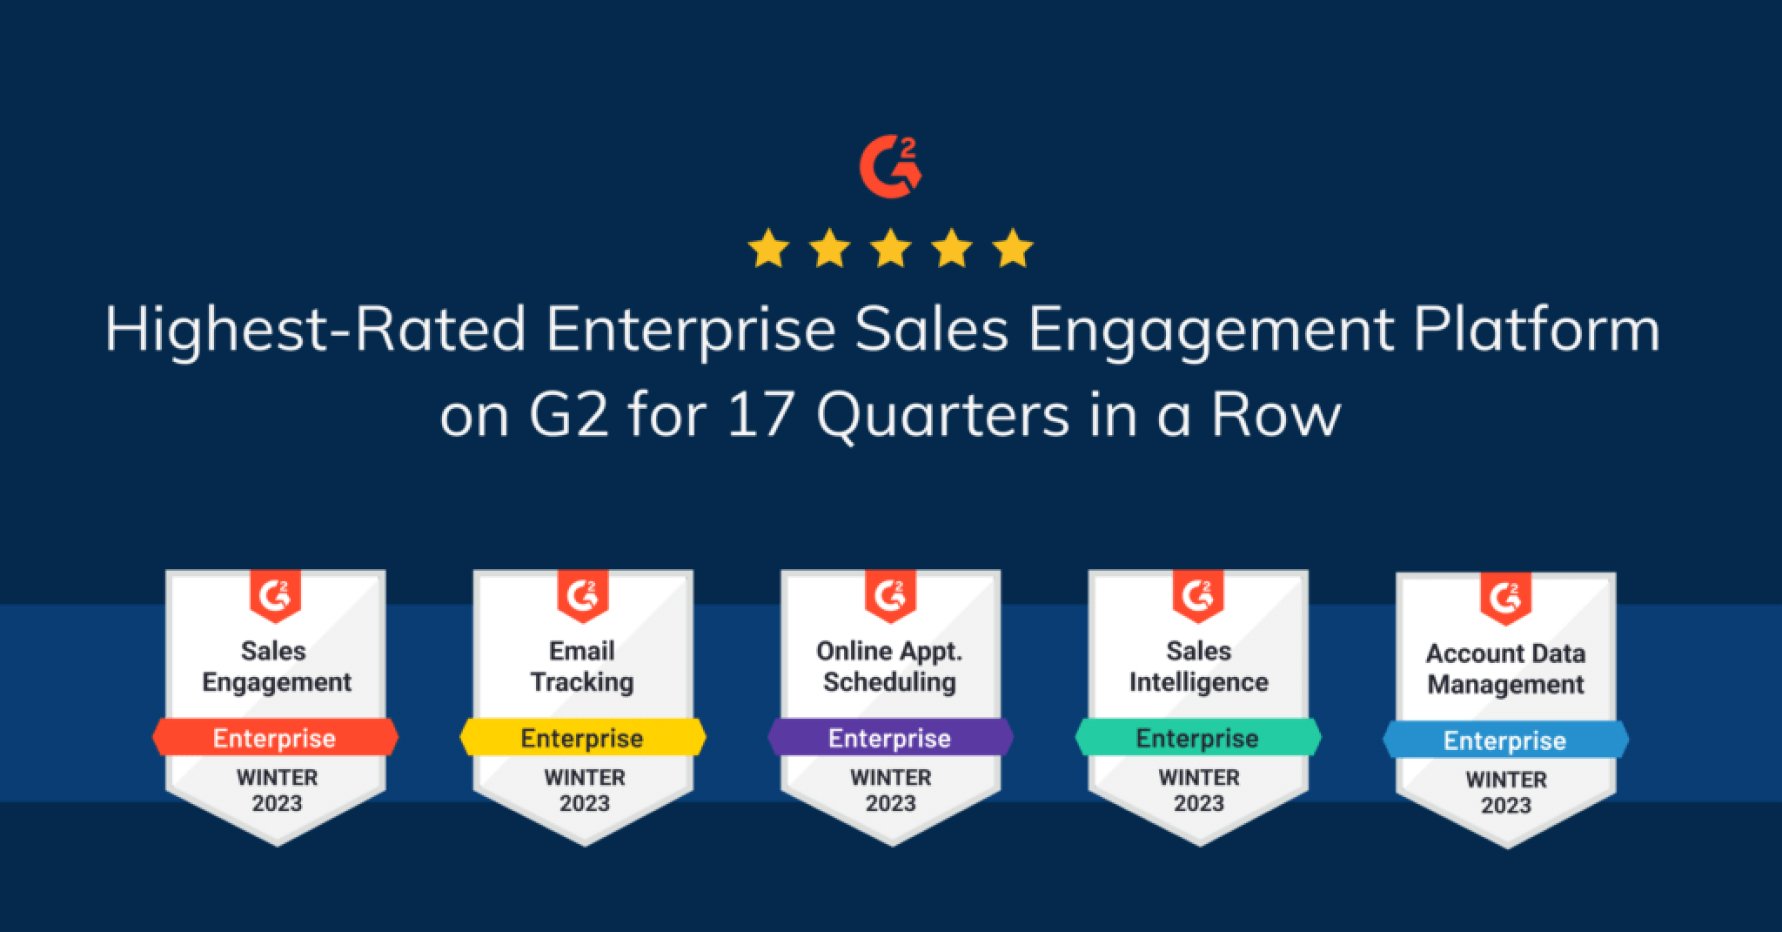 Highest-Rated Enterprise Sales Engagment Platform on G2 for 17 Quarters in a Row